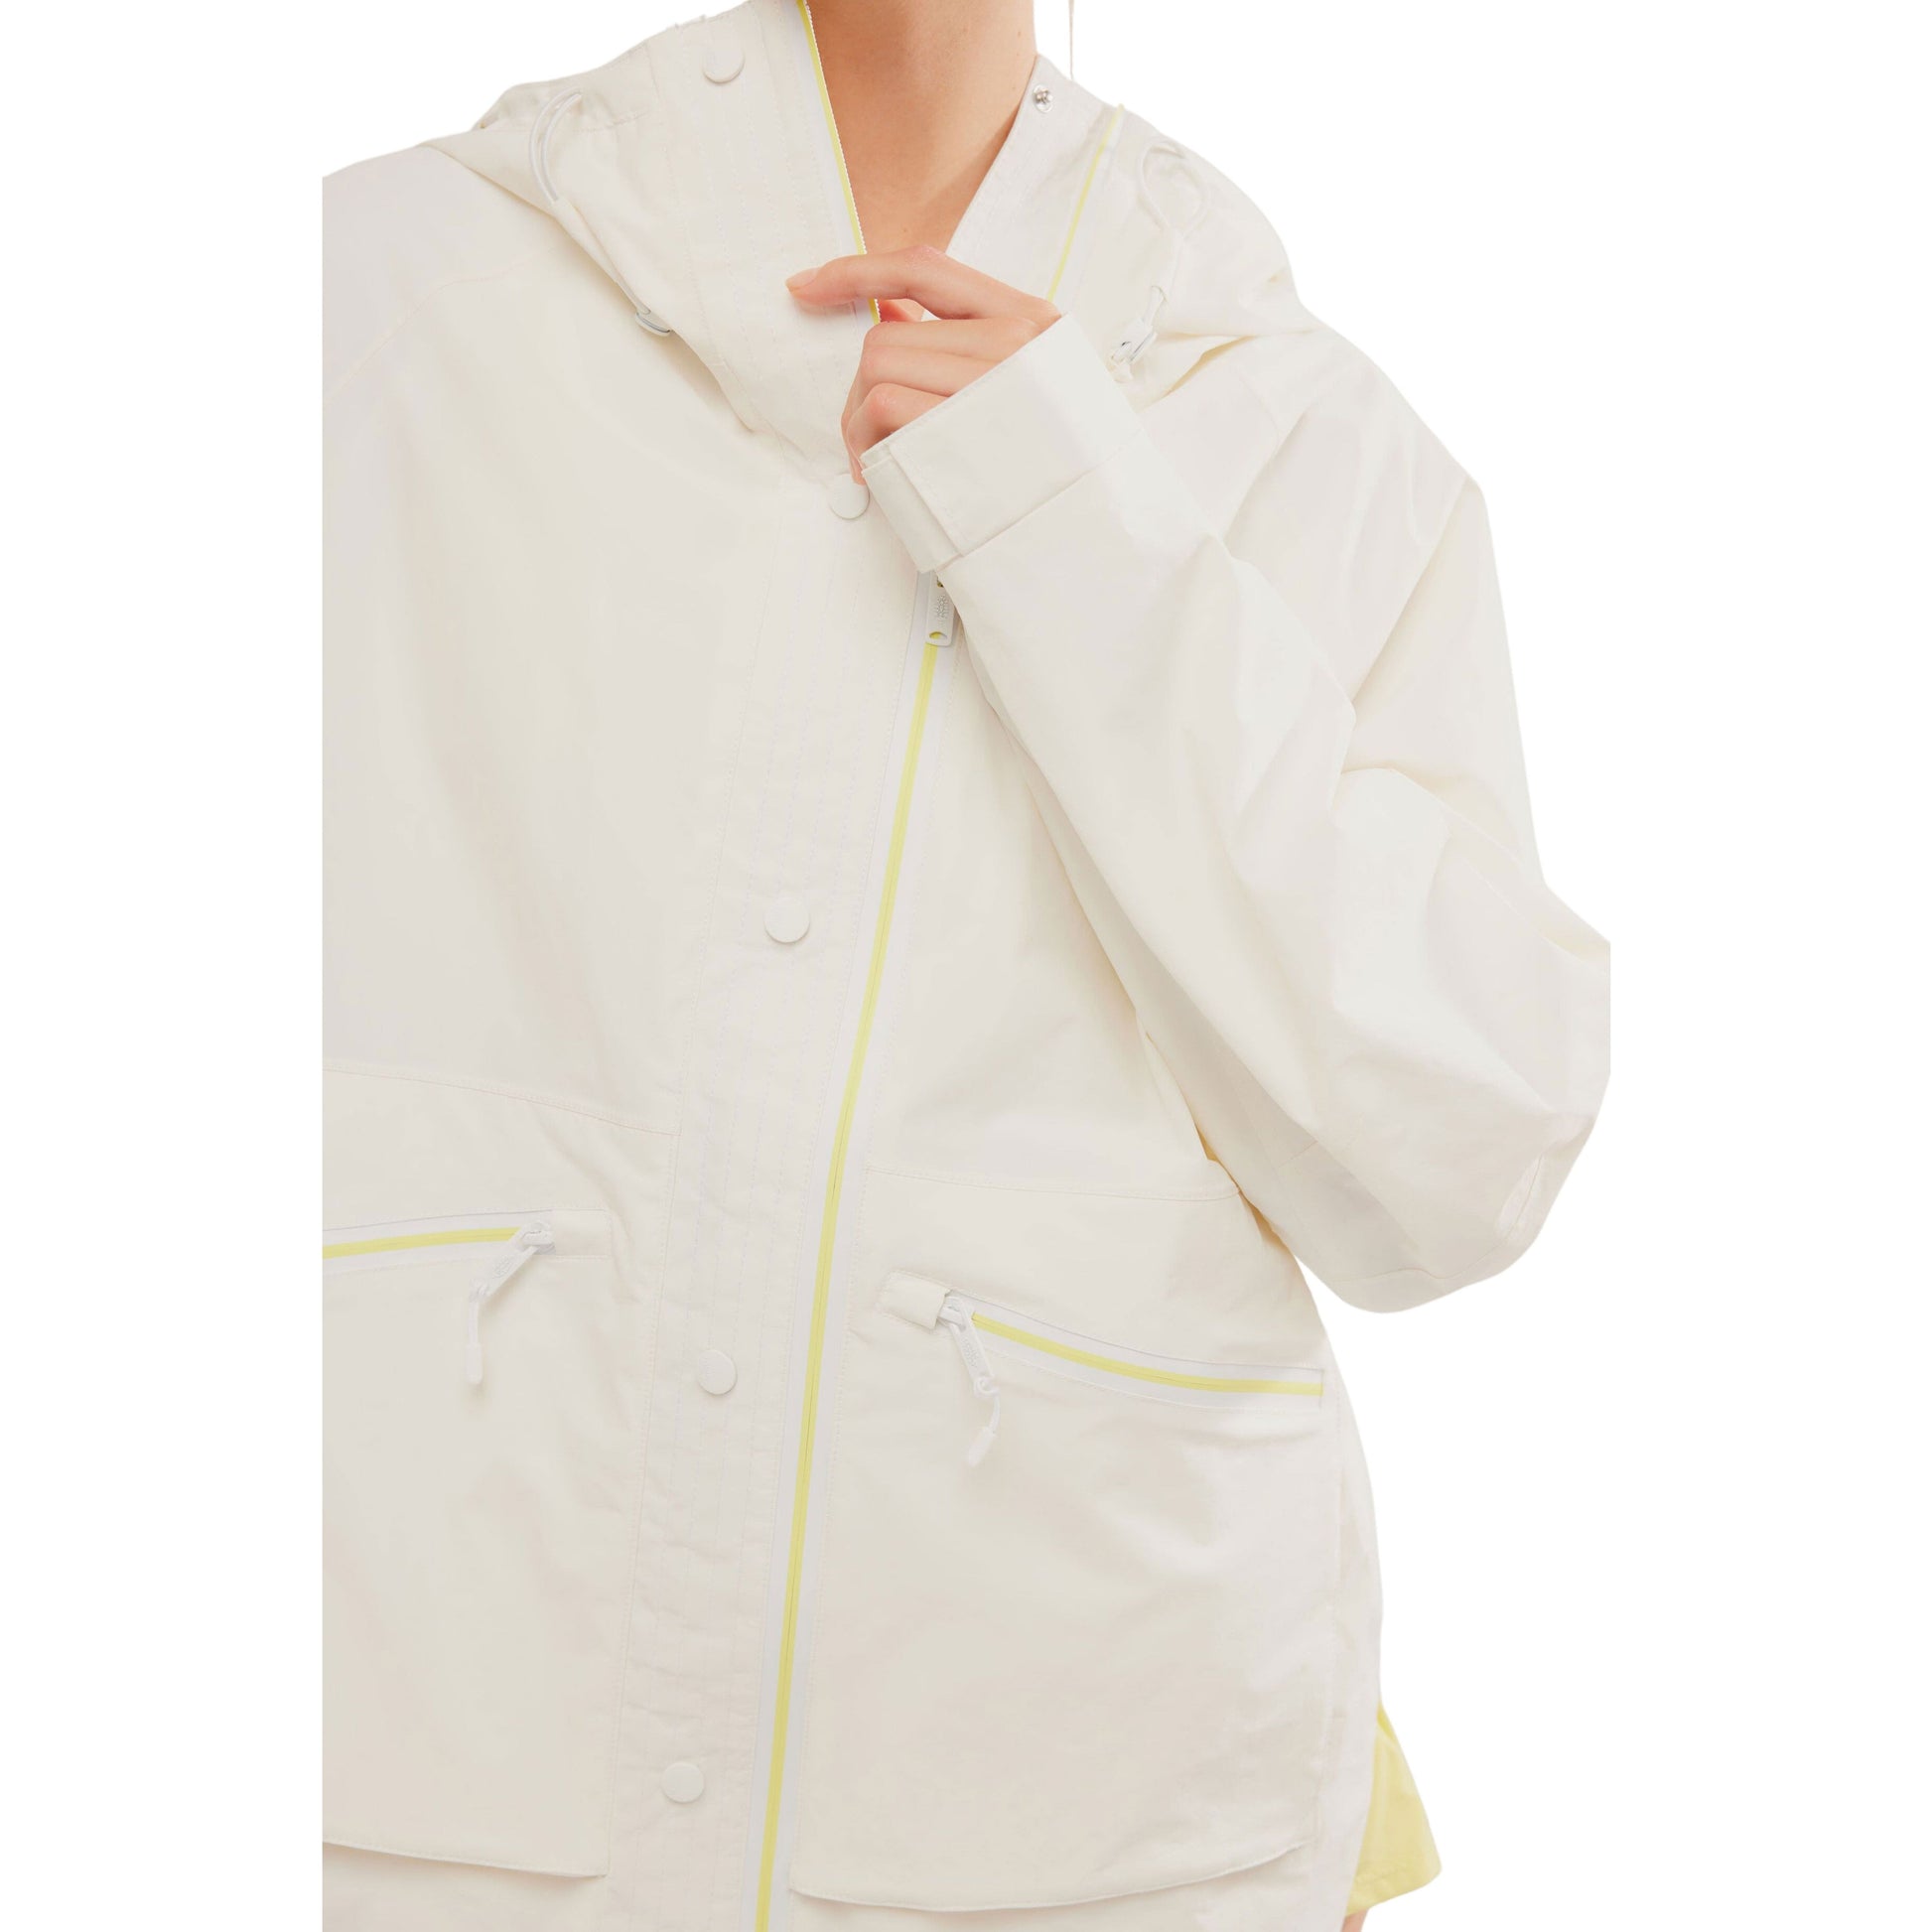 Close-up of a person covered up to the nose, wearing a Free People Movement Singin in the Rain Jacket in Painted White with lime green zipper details.